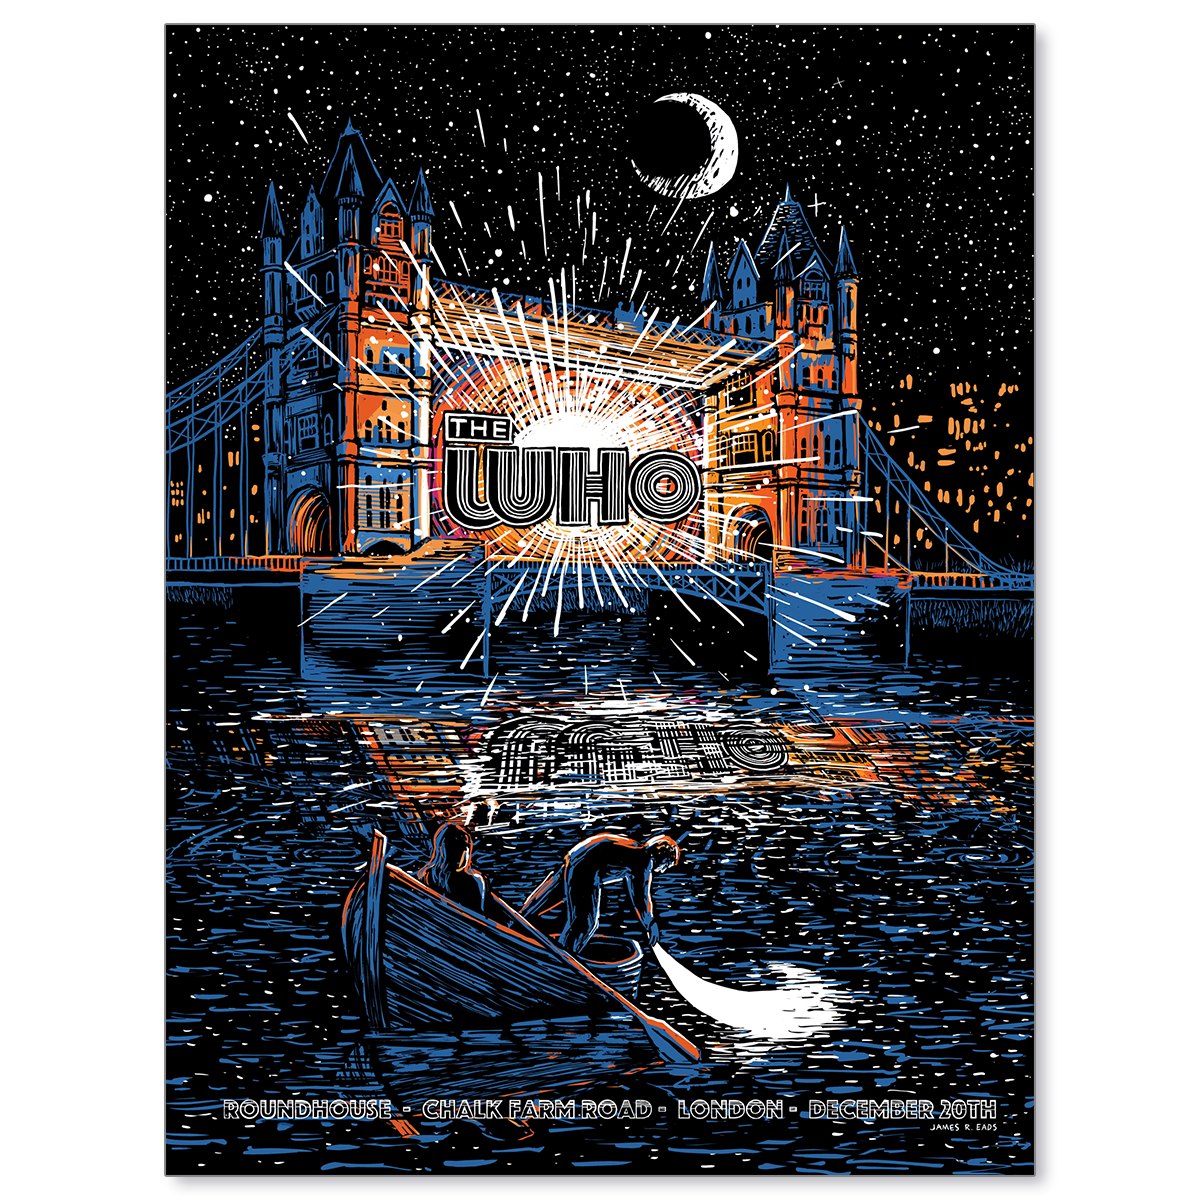 The Who London 1970 by James R. Eads (Main Edition)